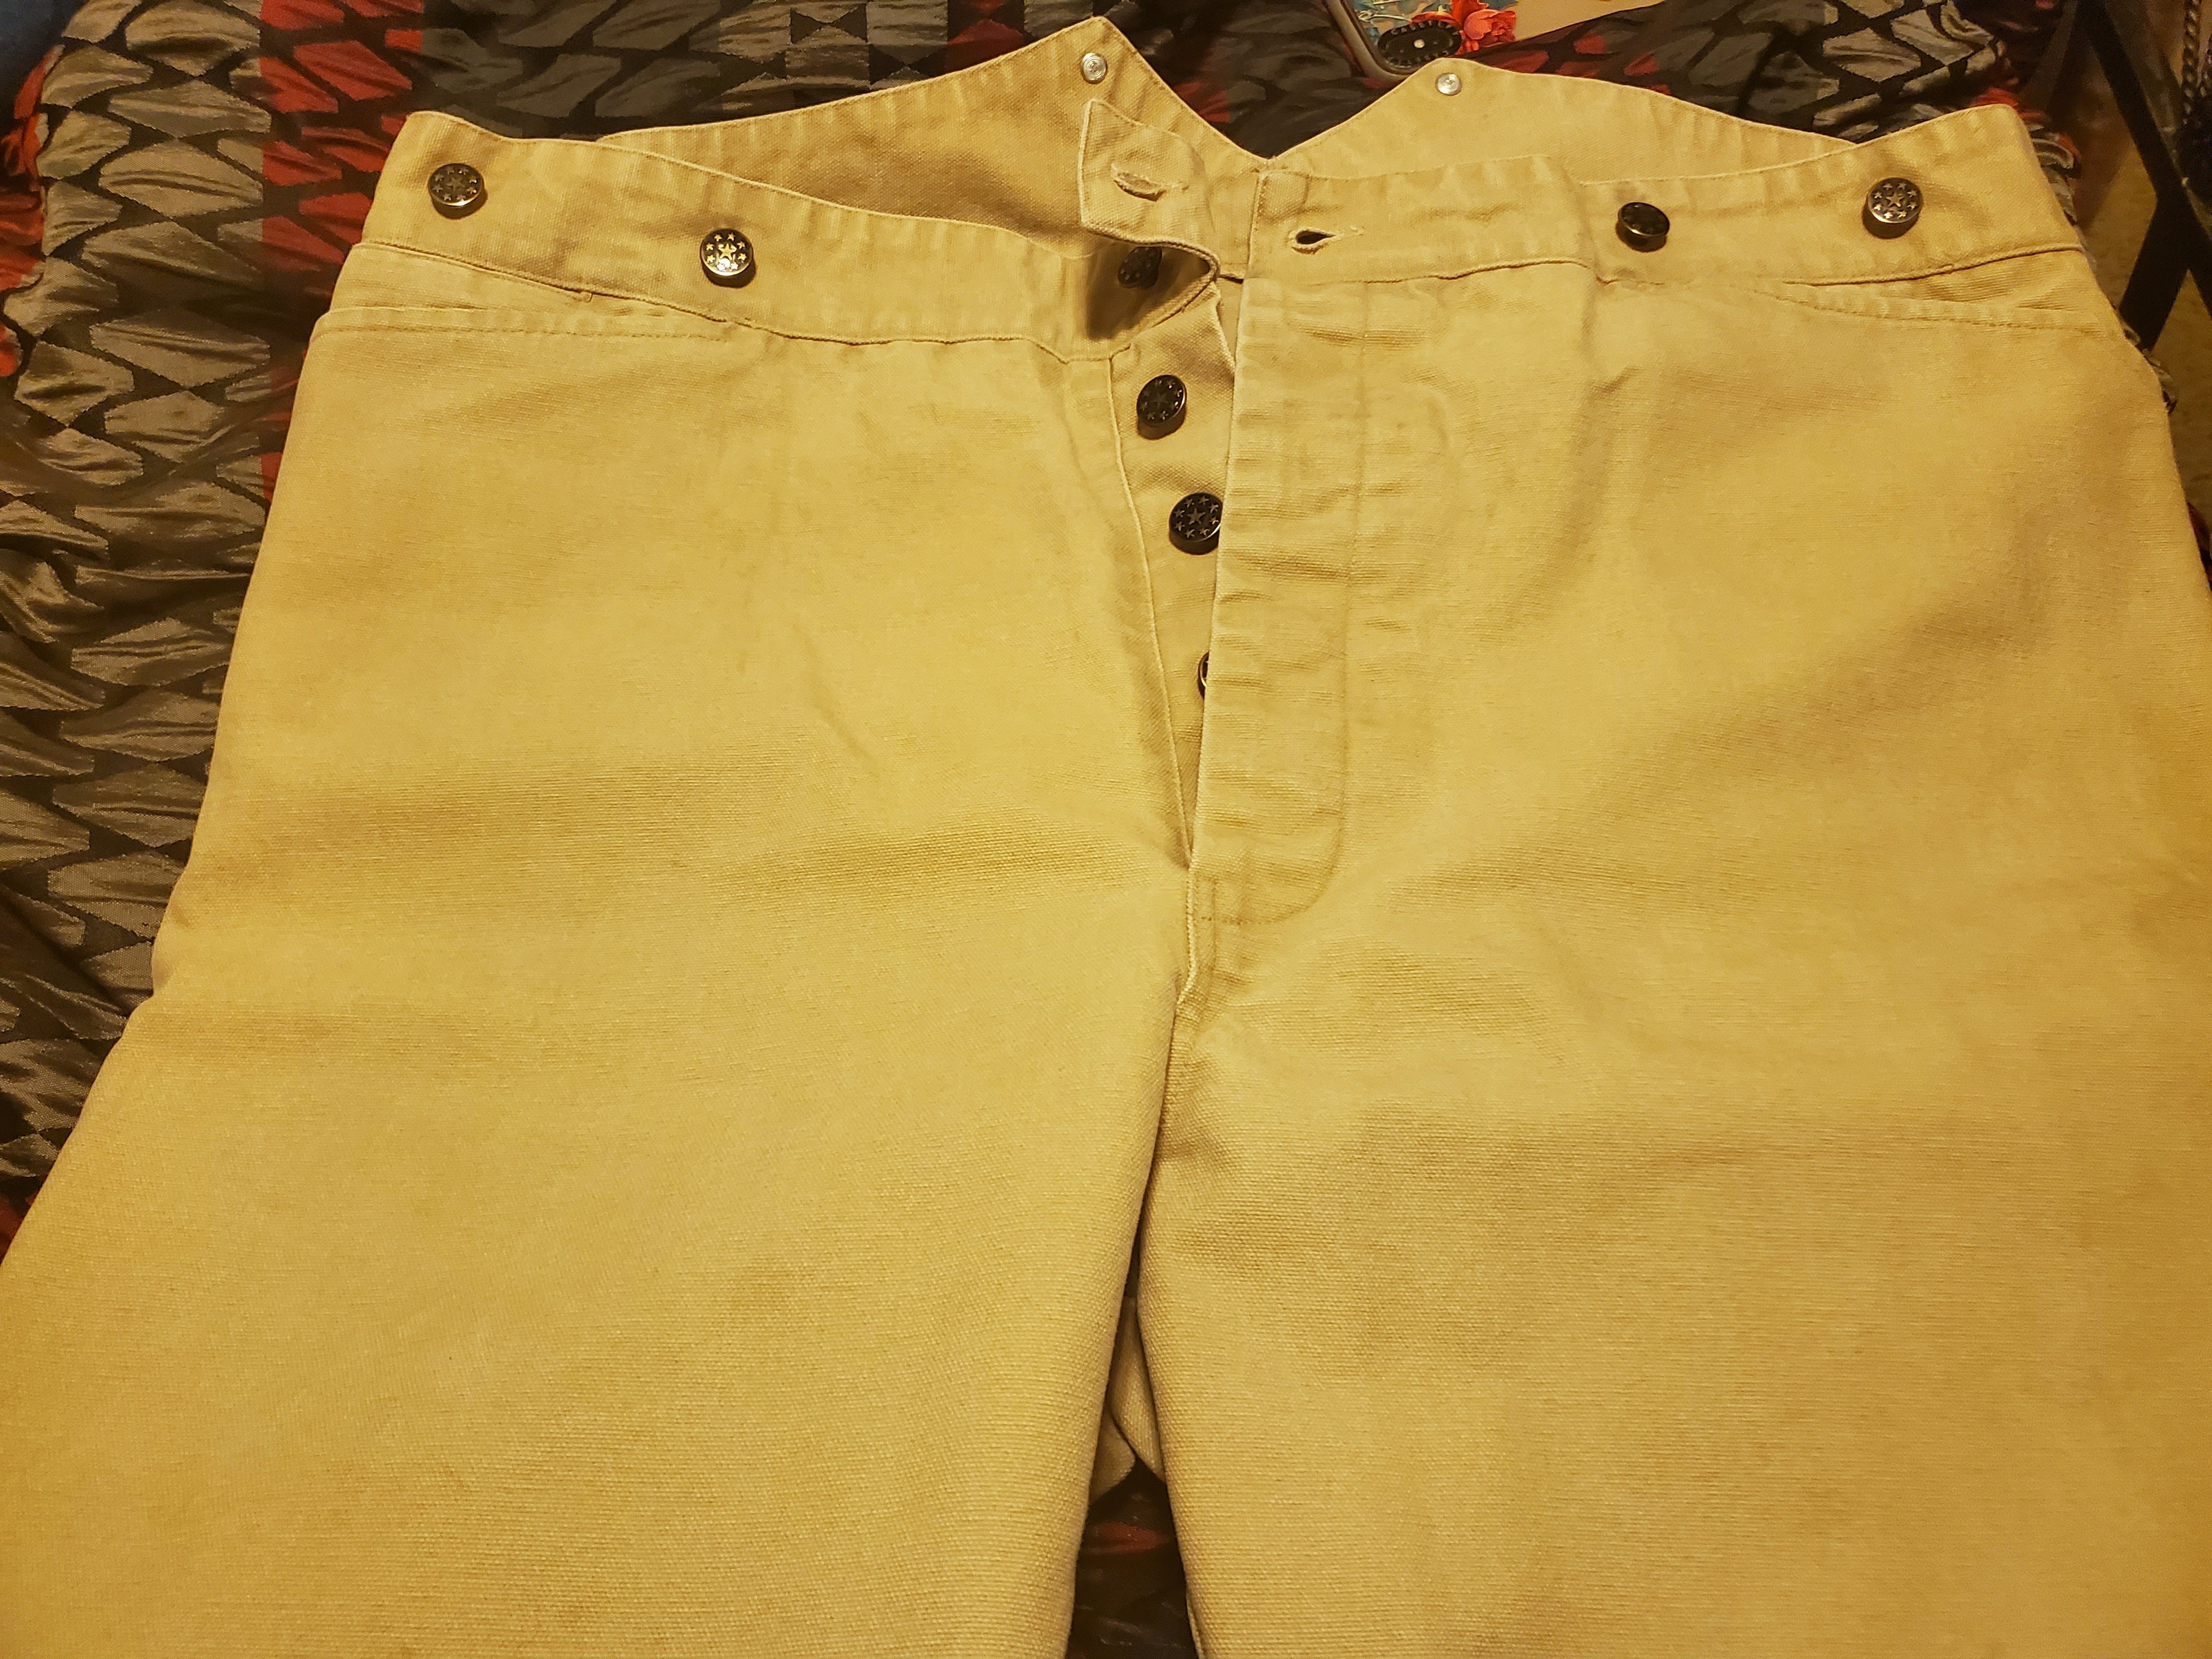 Cowboy pants for sale! - SASS Wire Classifieds - SASS Wire Forum